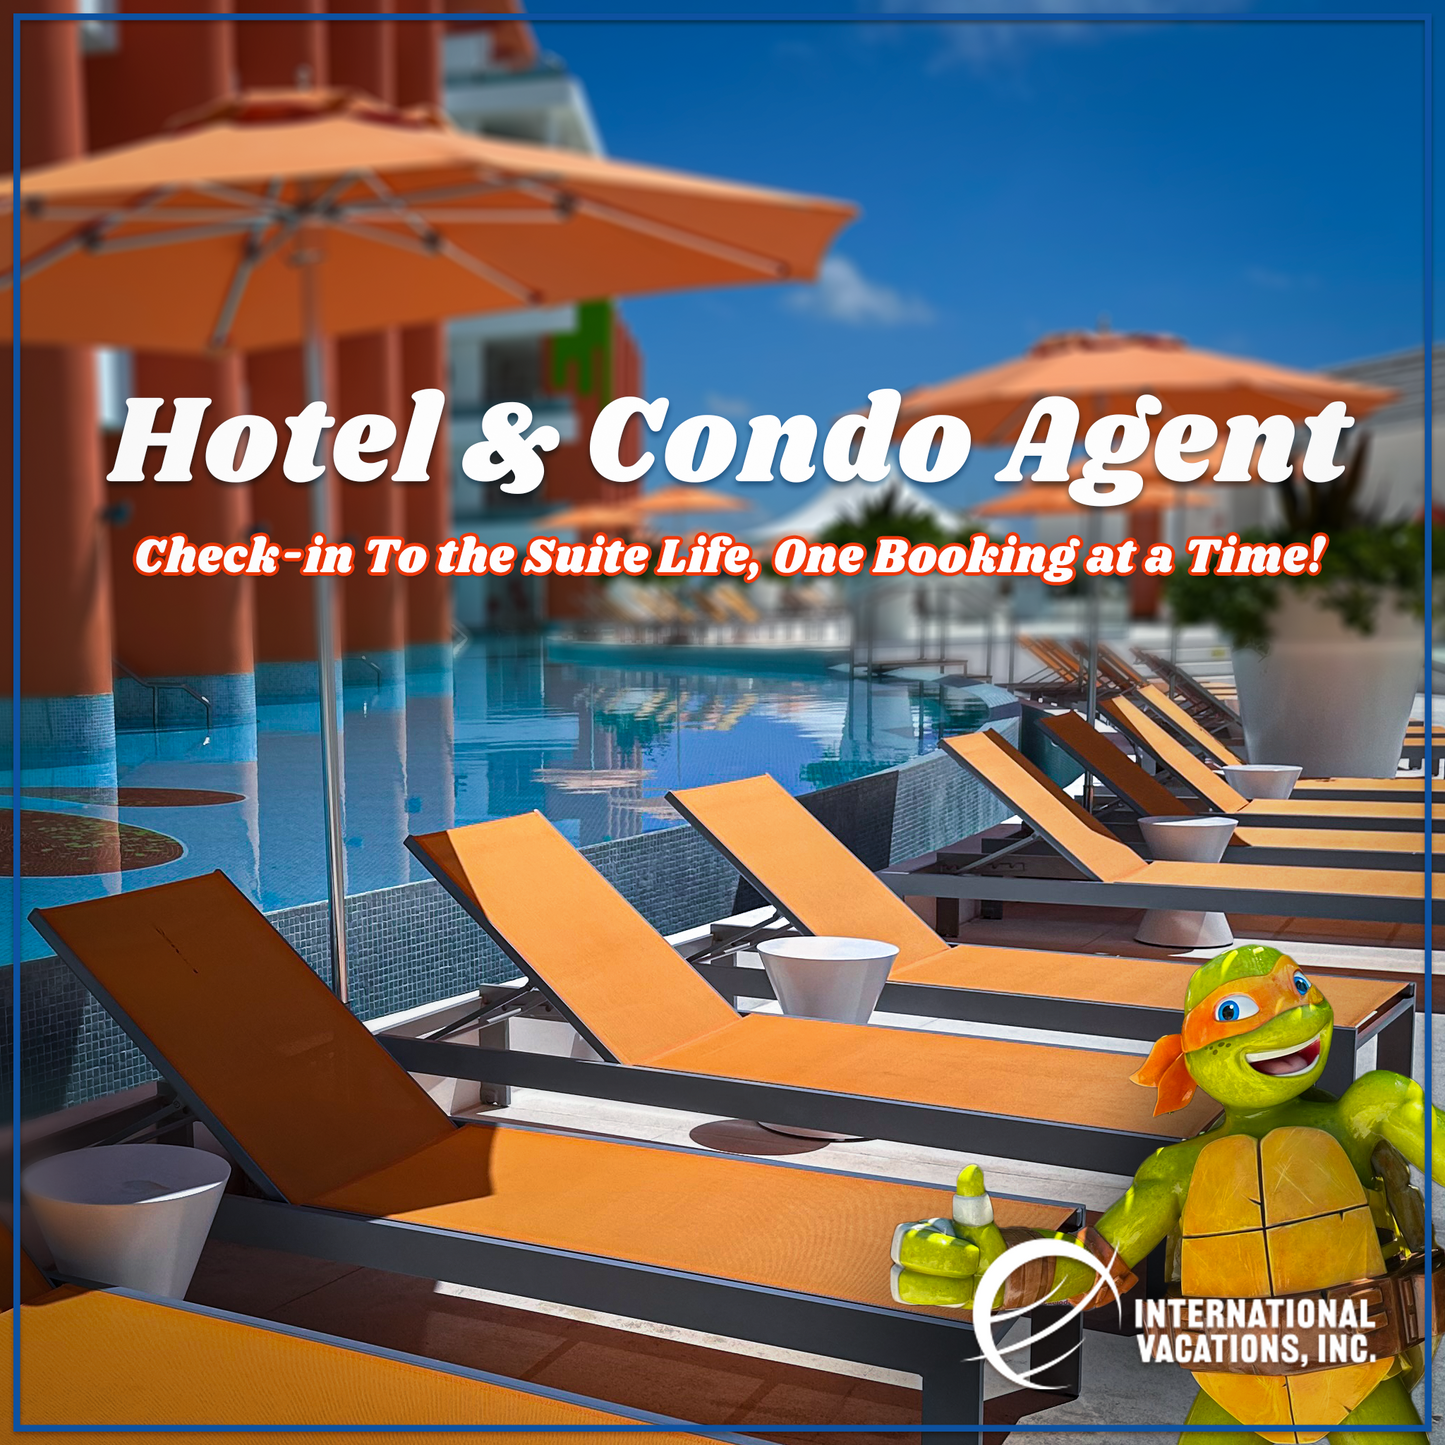 Become an Independent Hotel & Condo Travel Agent with International Vacations, Inc.!